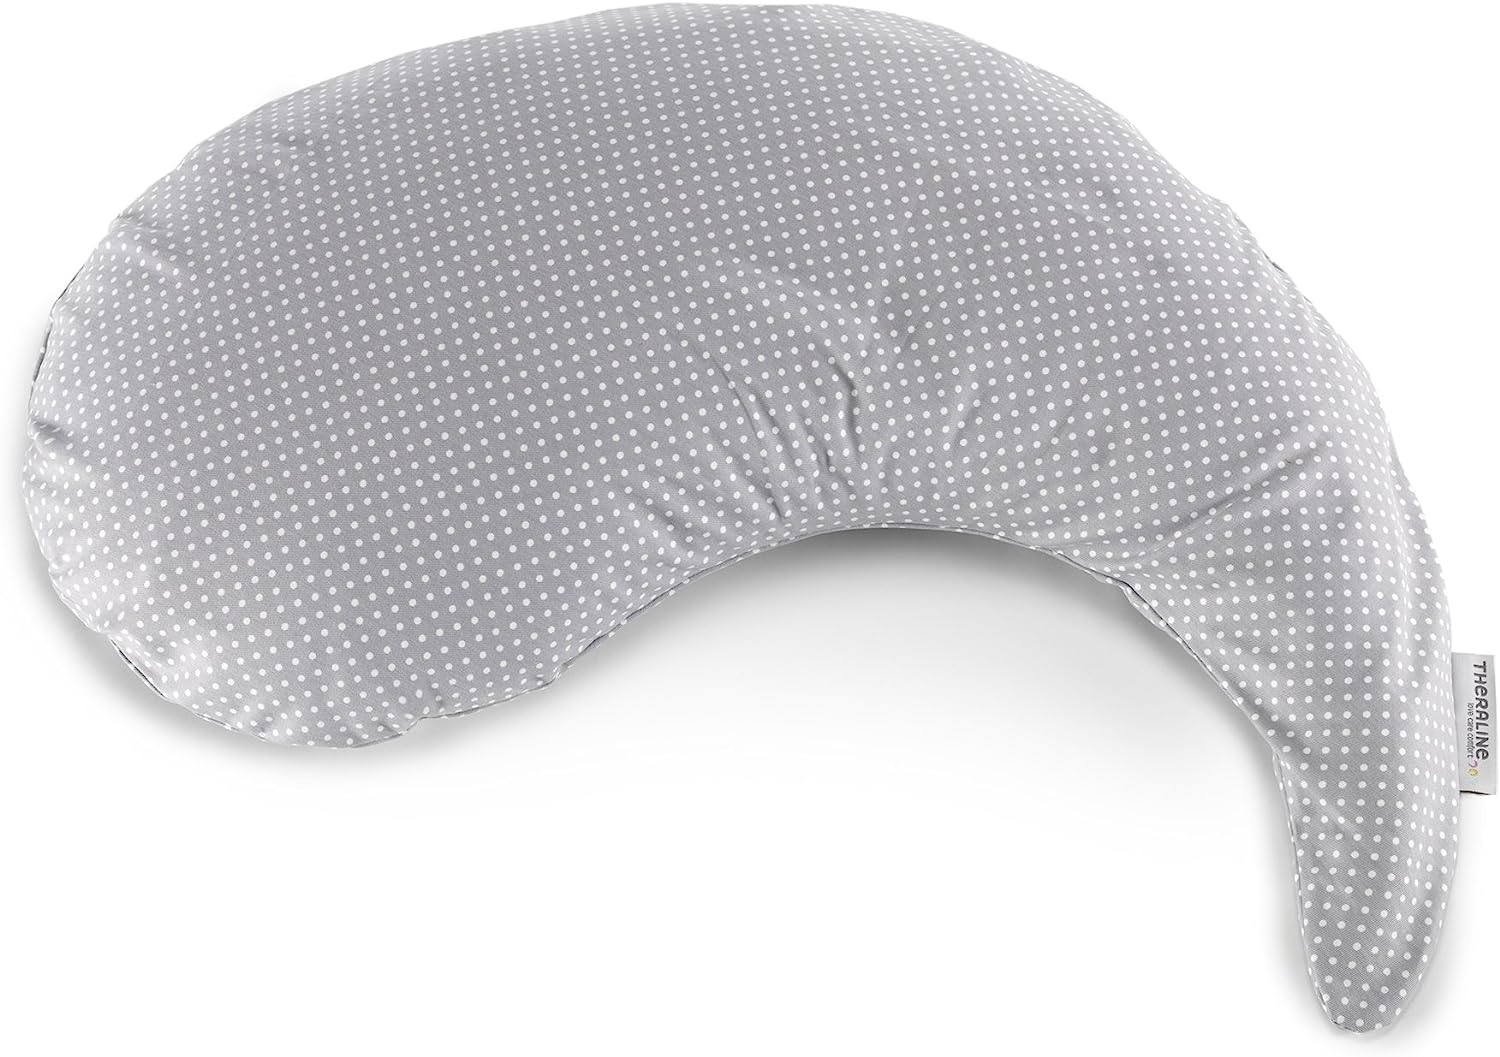 Nursing pillow cover for Yinnie dots grey